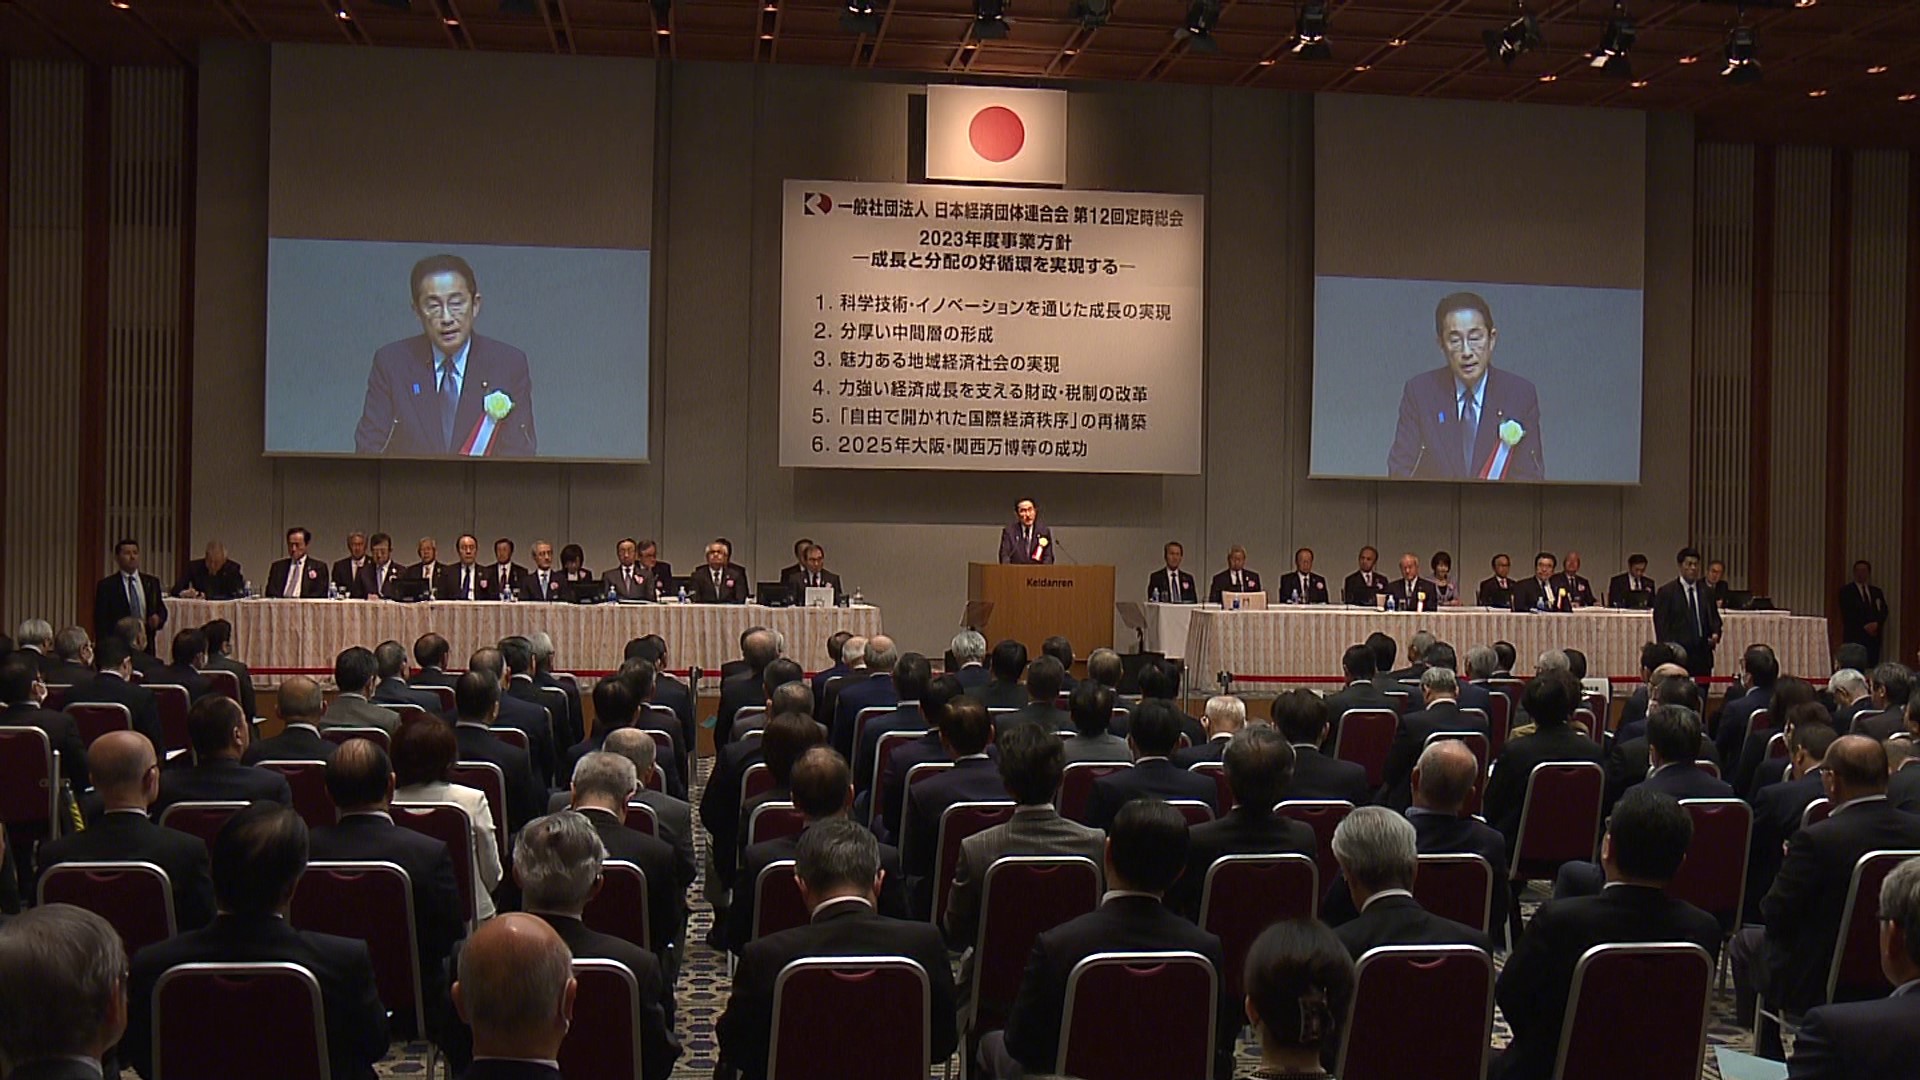 Annual General Assembly of Keidanren (Japan Business Federation)